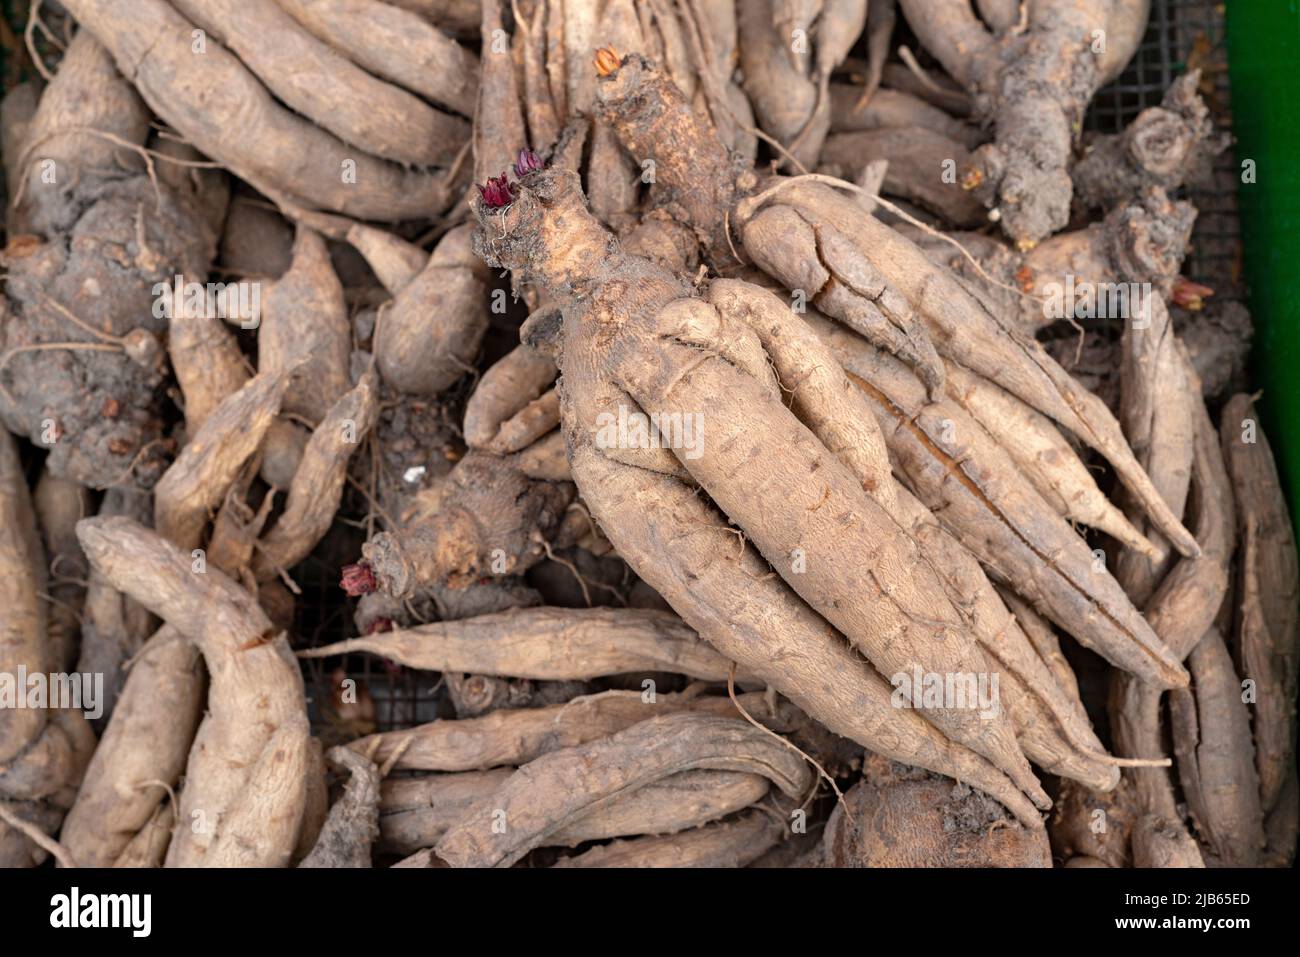 Incarvillea Delavayi Bulb With Roots Stock Photo